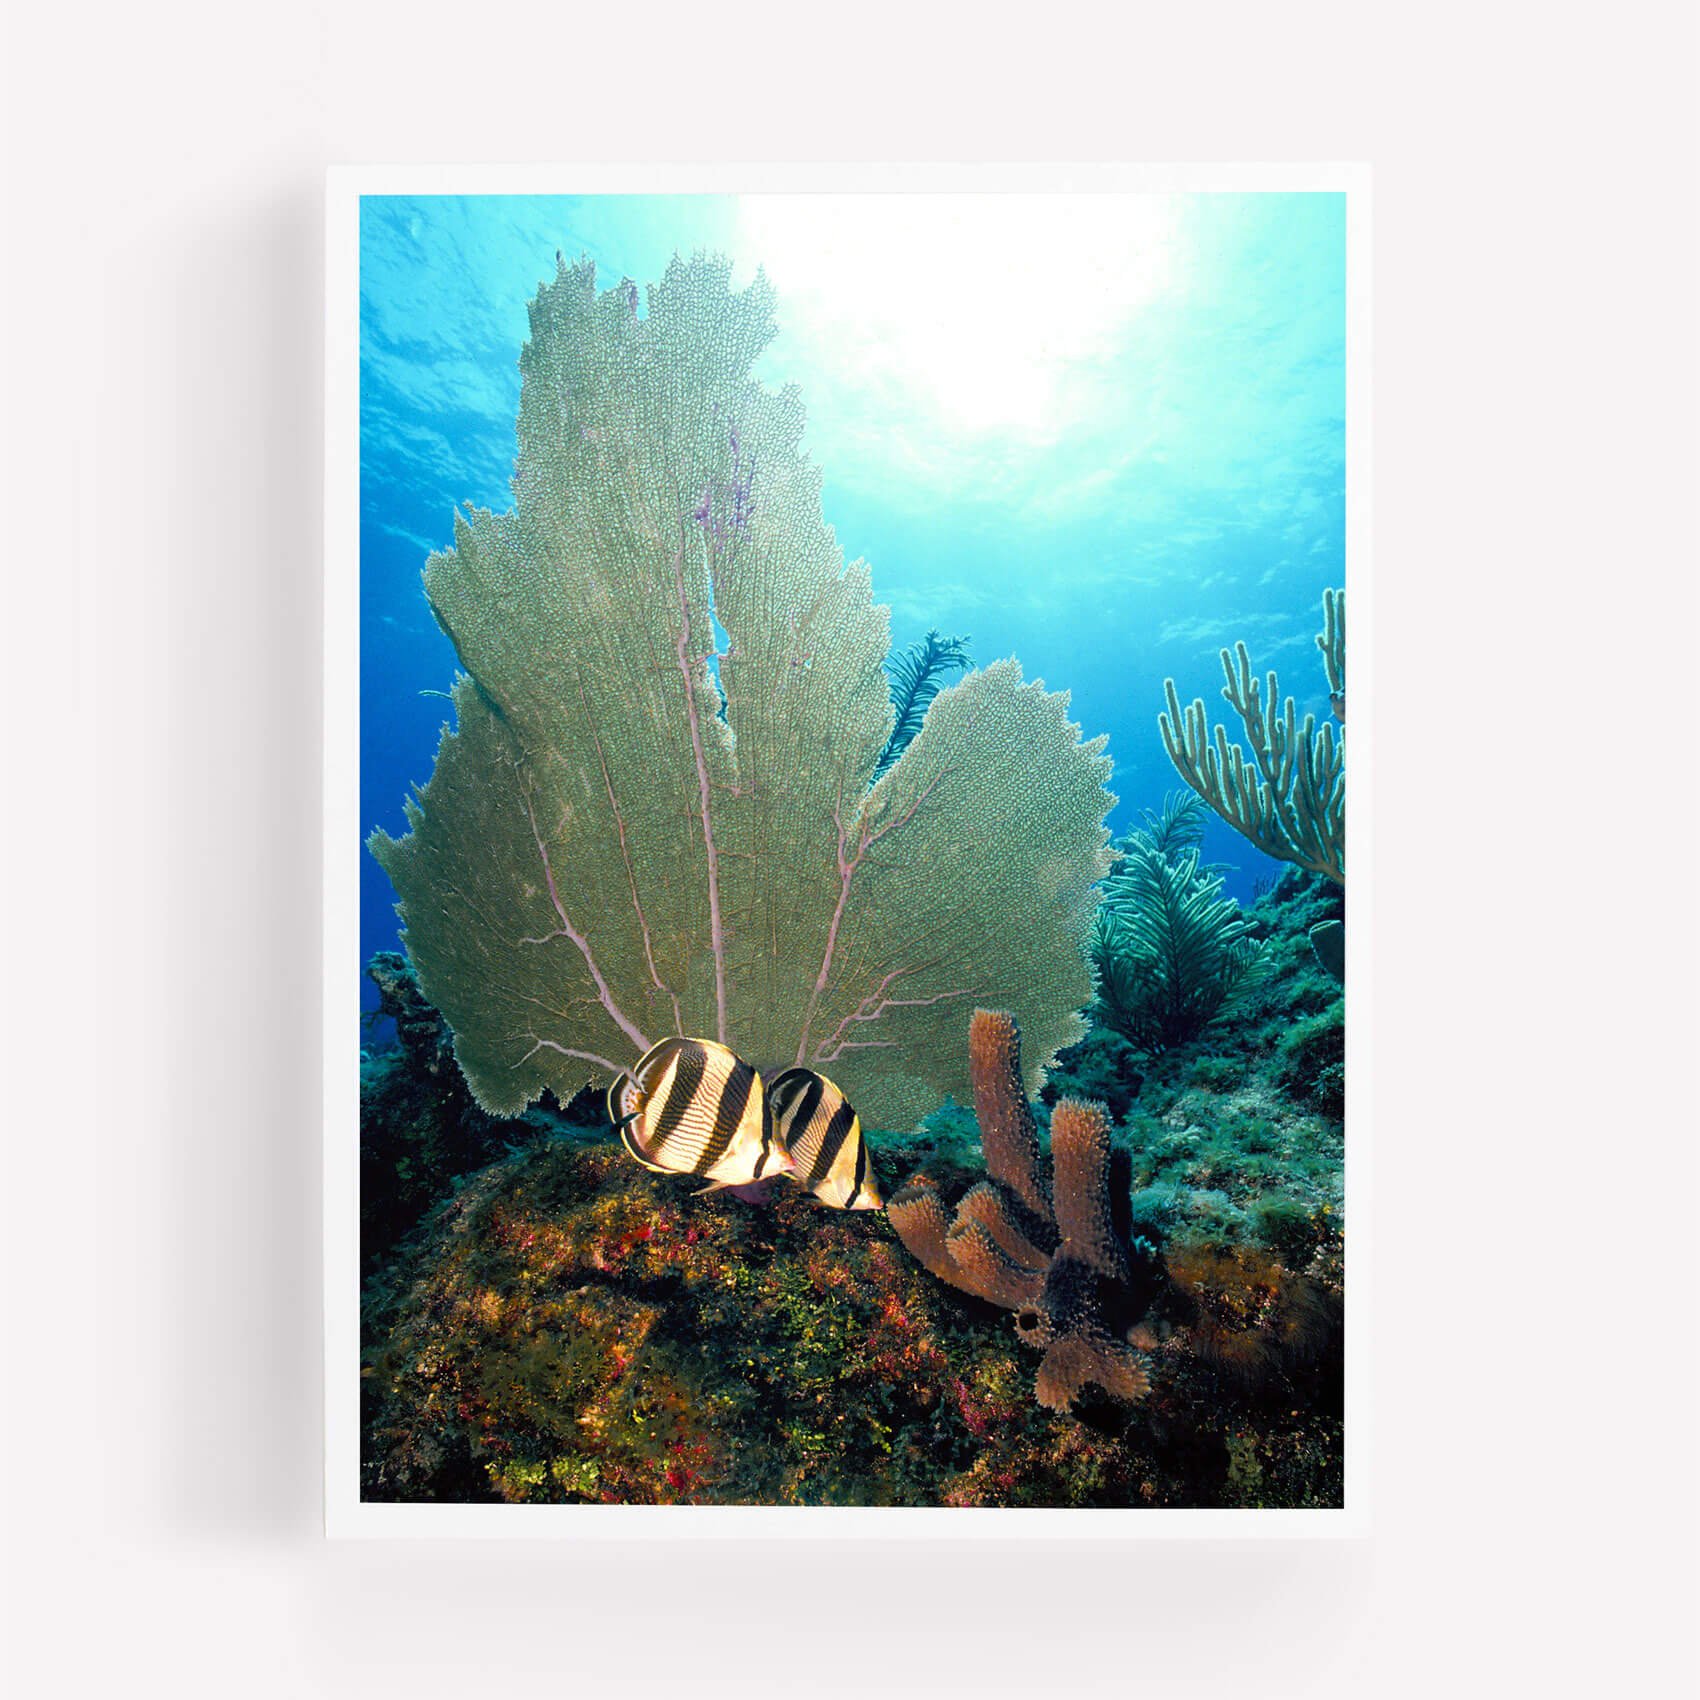 Sea Fans and Butterfly Fish - Care Studio Prints